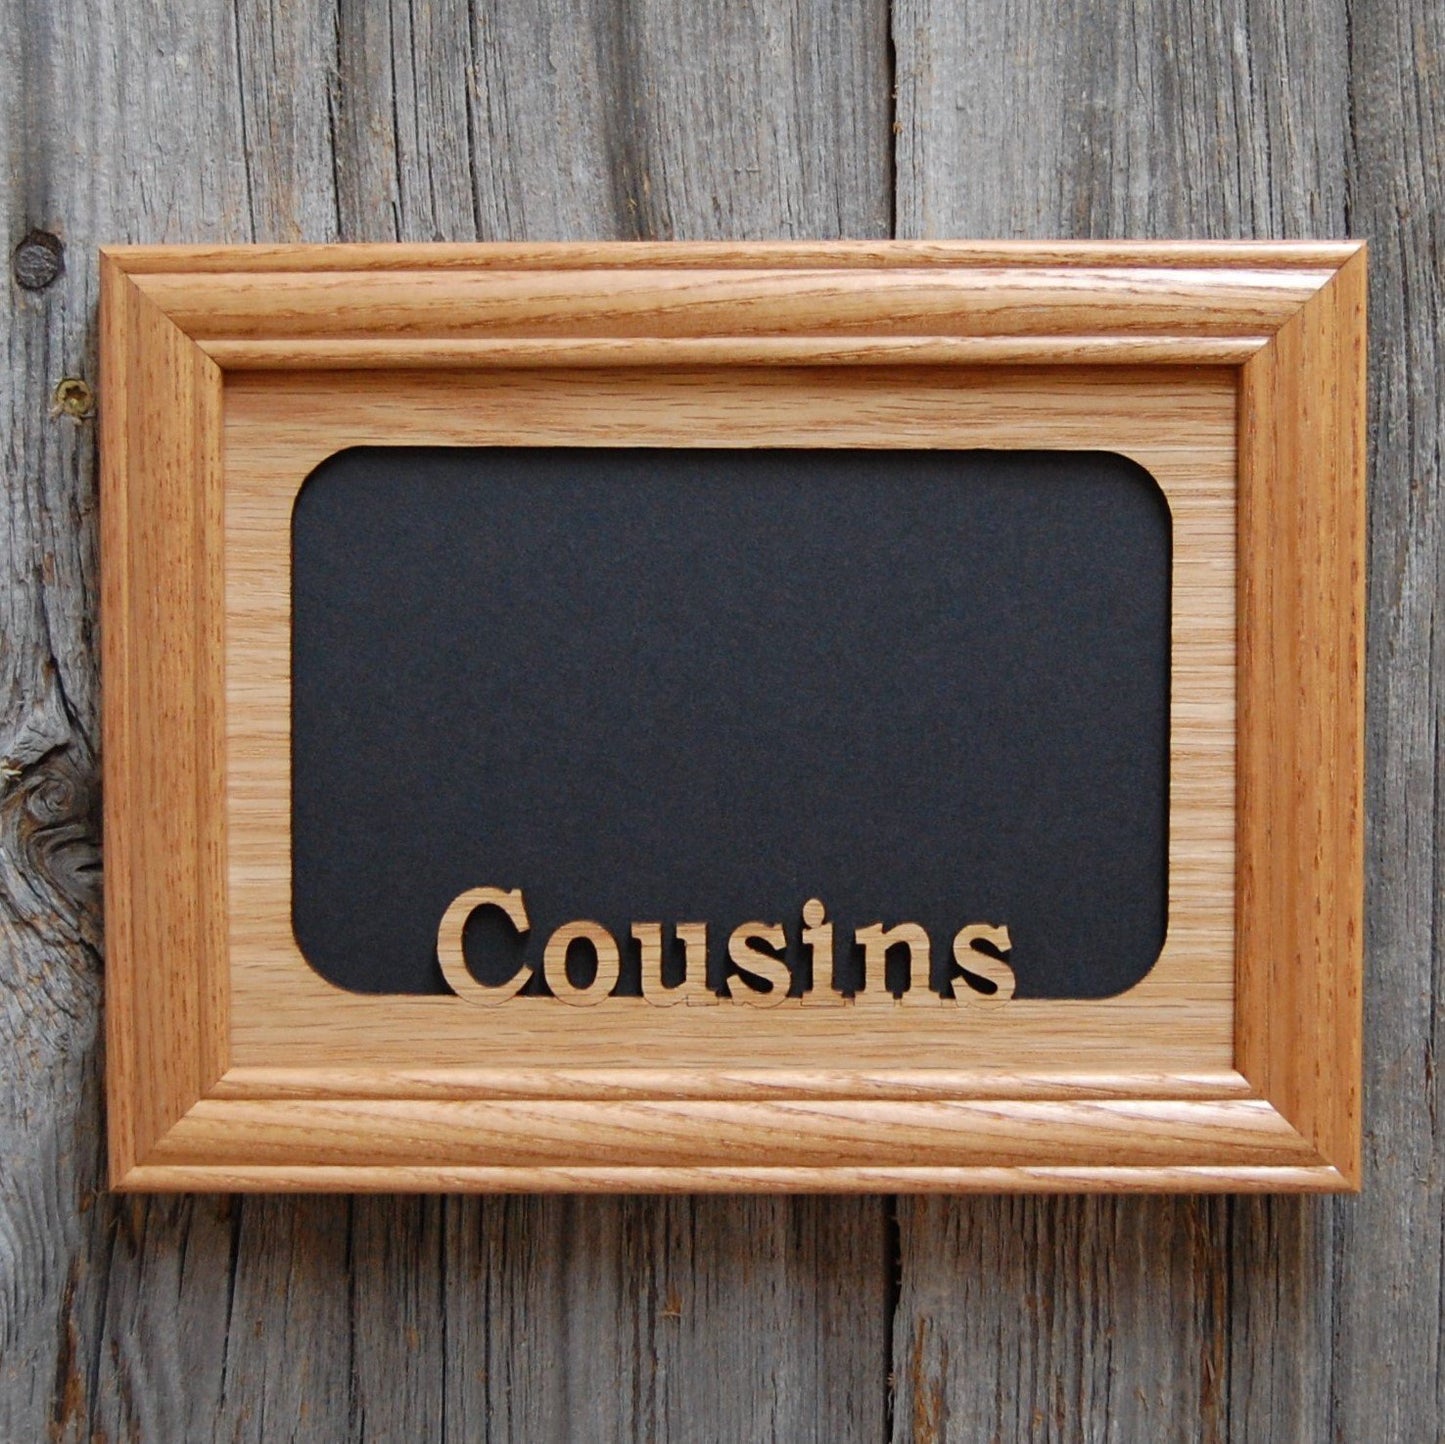 5x7 Cousins Picture Frame, Picture Frame, home decor, laser engraved - Legacy Images